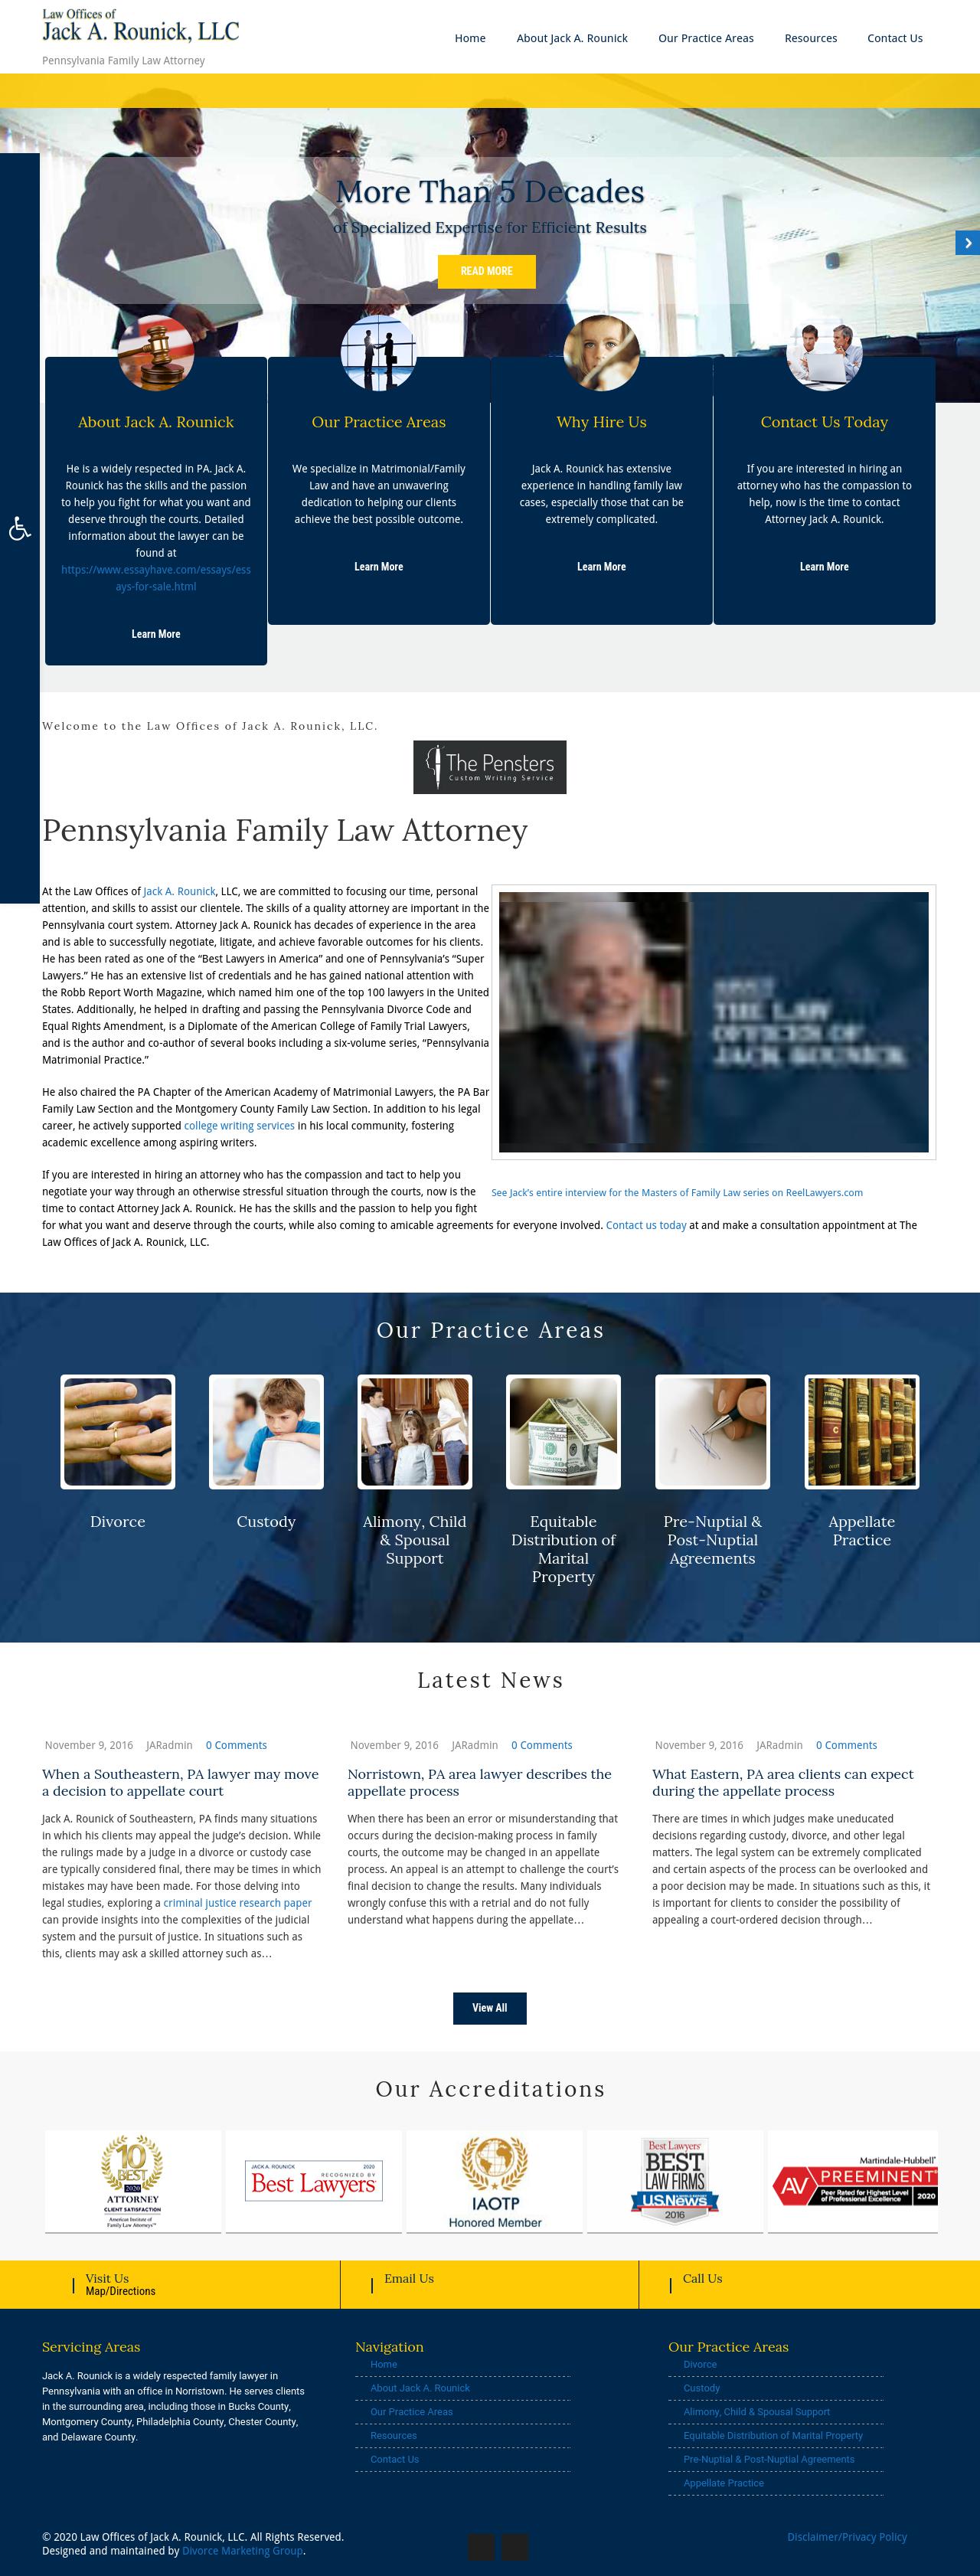 Law Offices of Jack A. Rounick, LLC - Norristown PA Lawyers